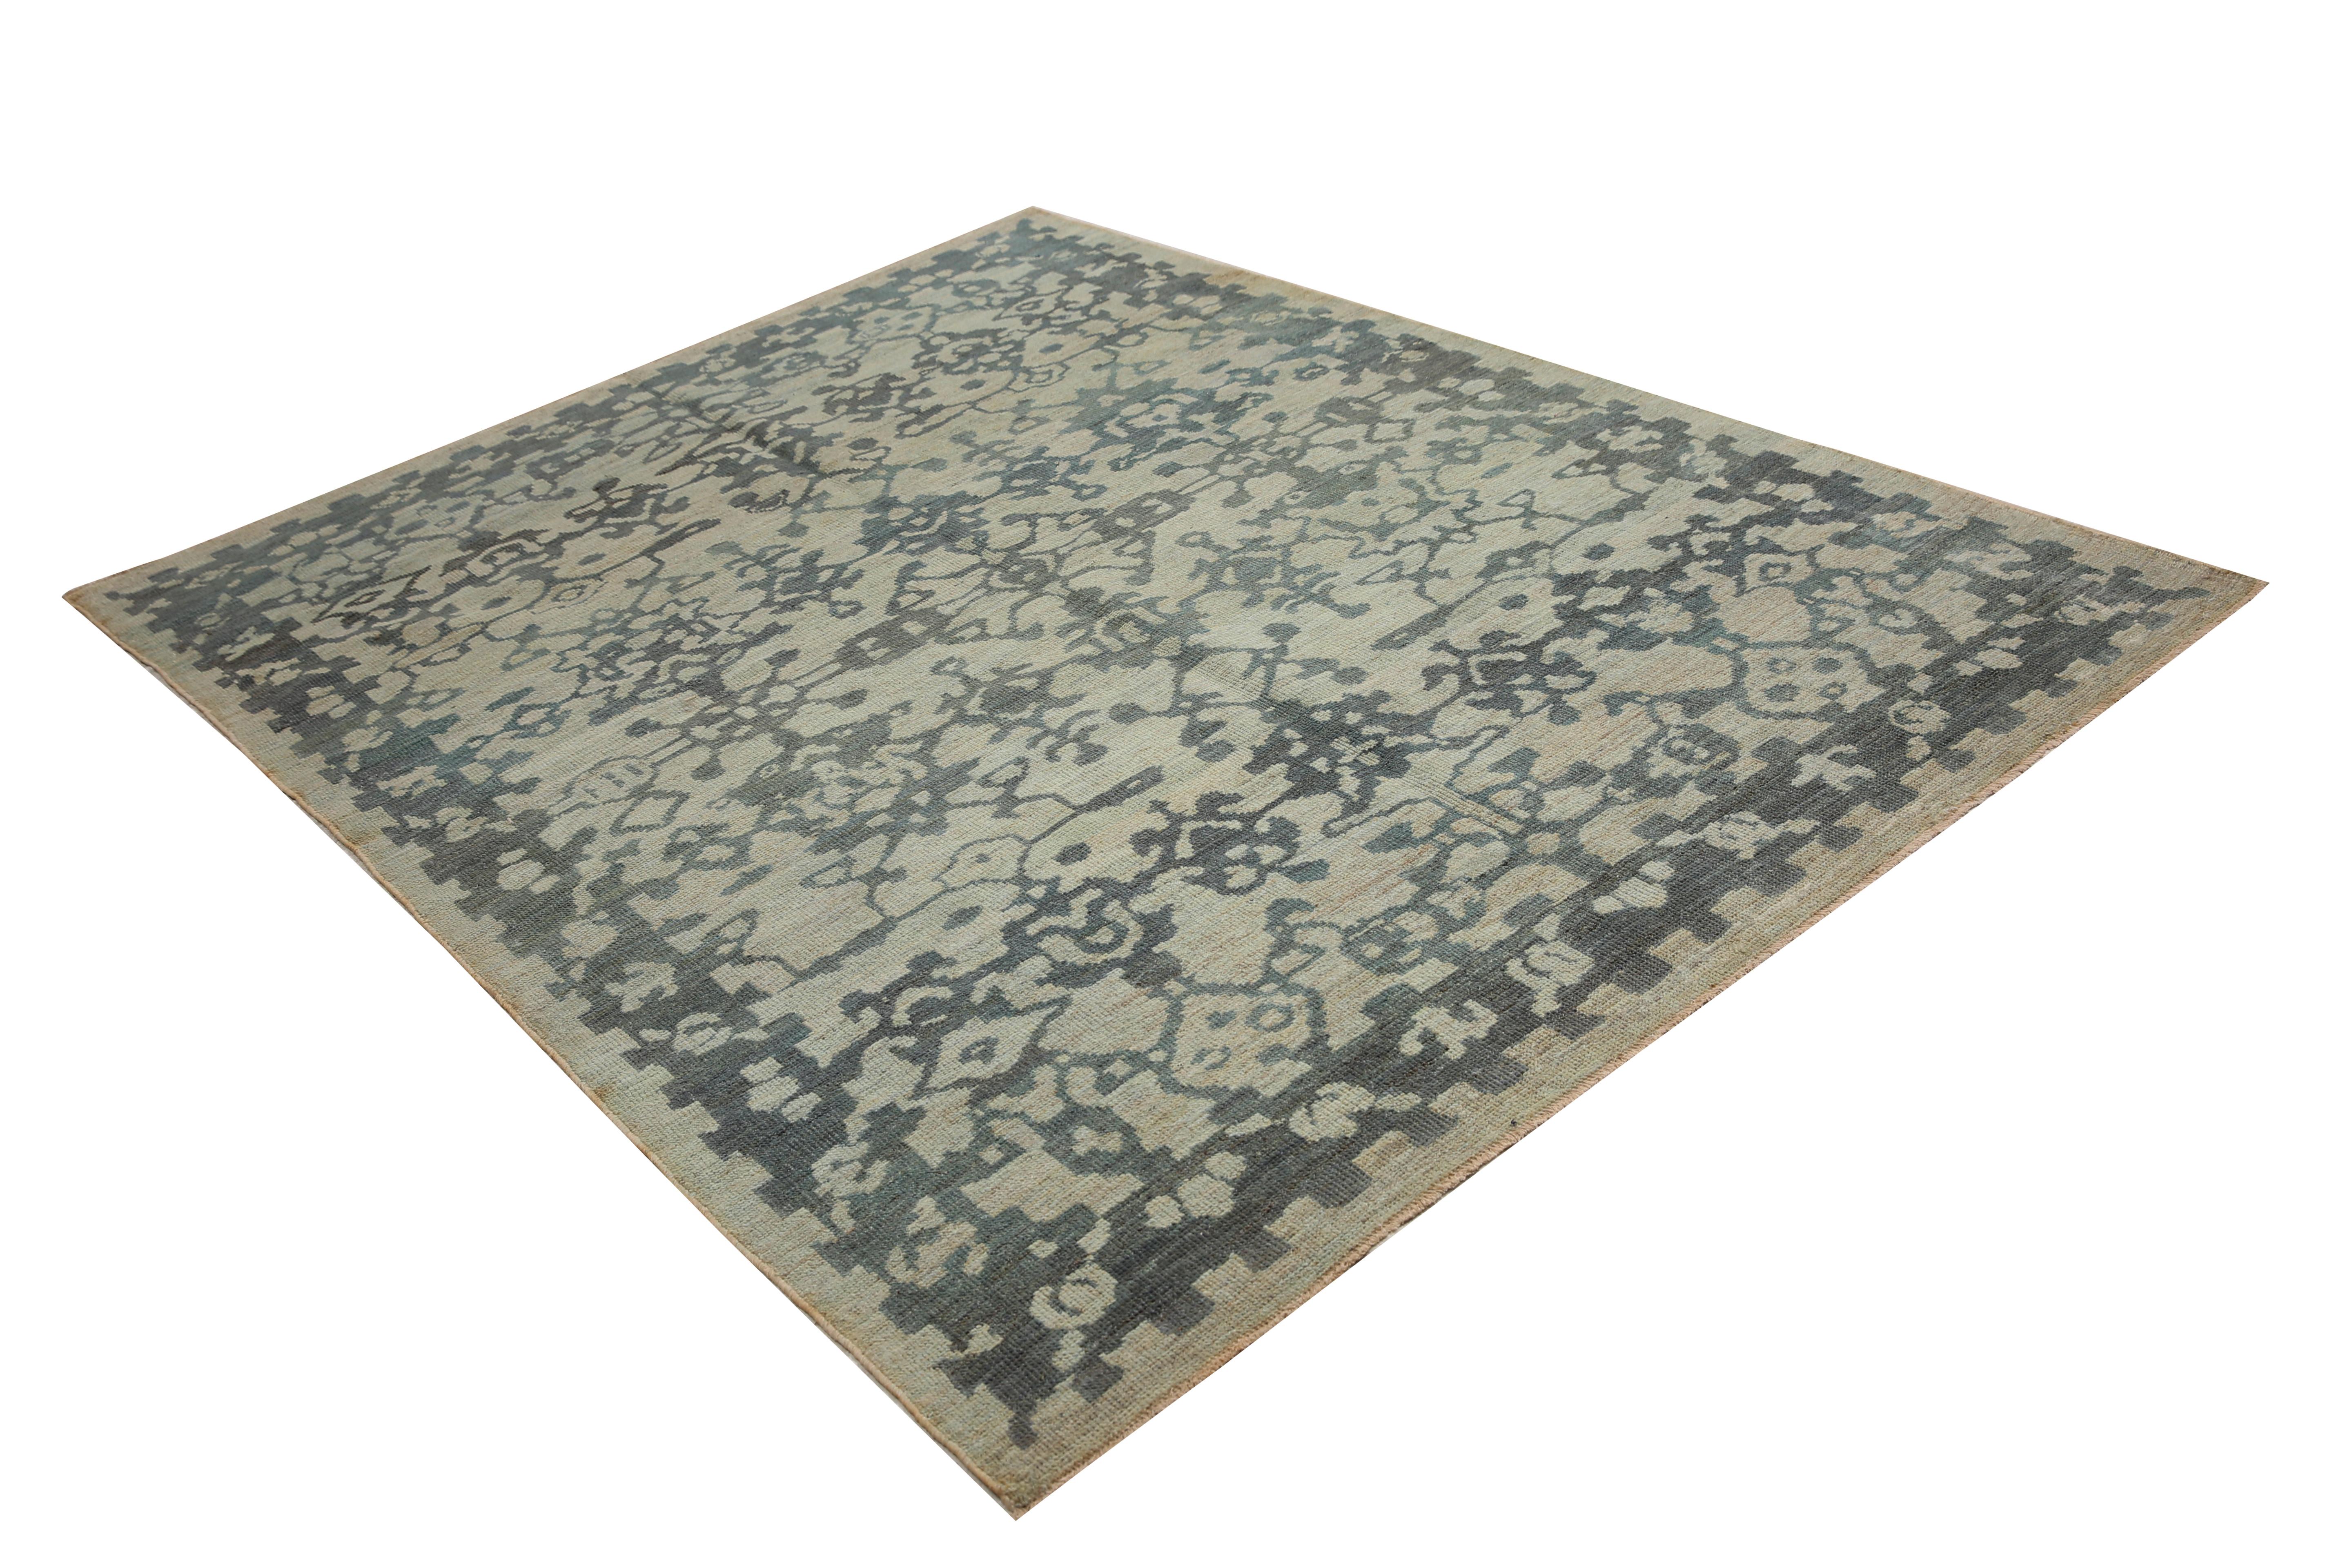 Luxurious Handmade Sultanabad Rug - Transitional Design, Blue Tones - 5'10'' x 8 For Sale 3